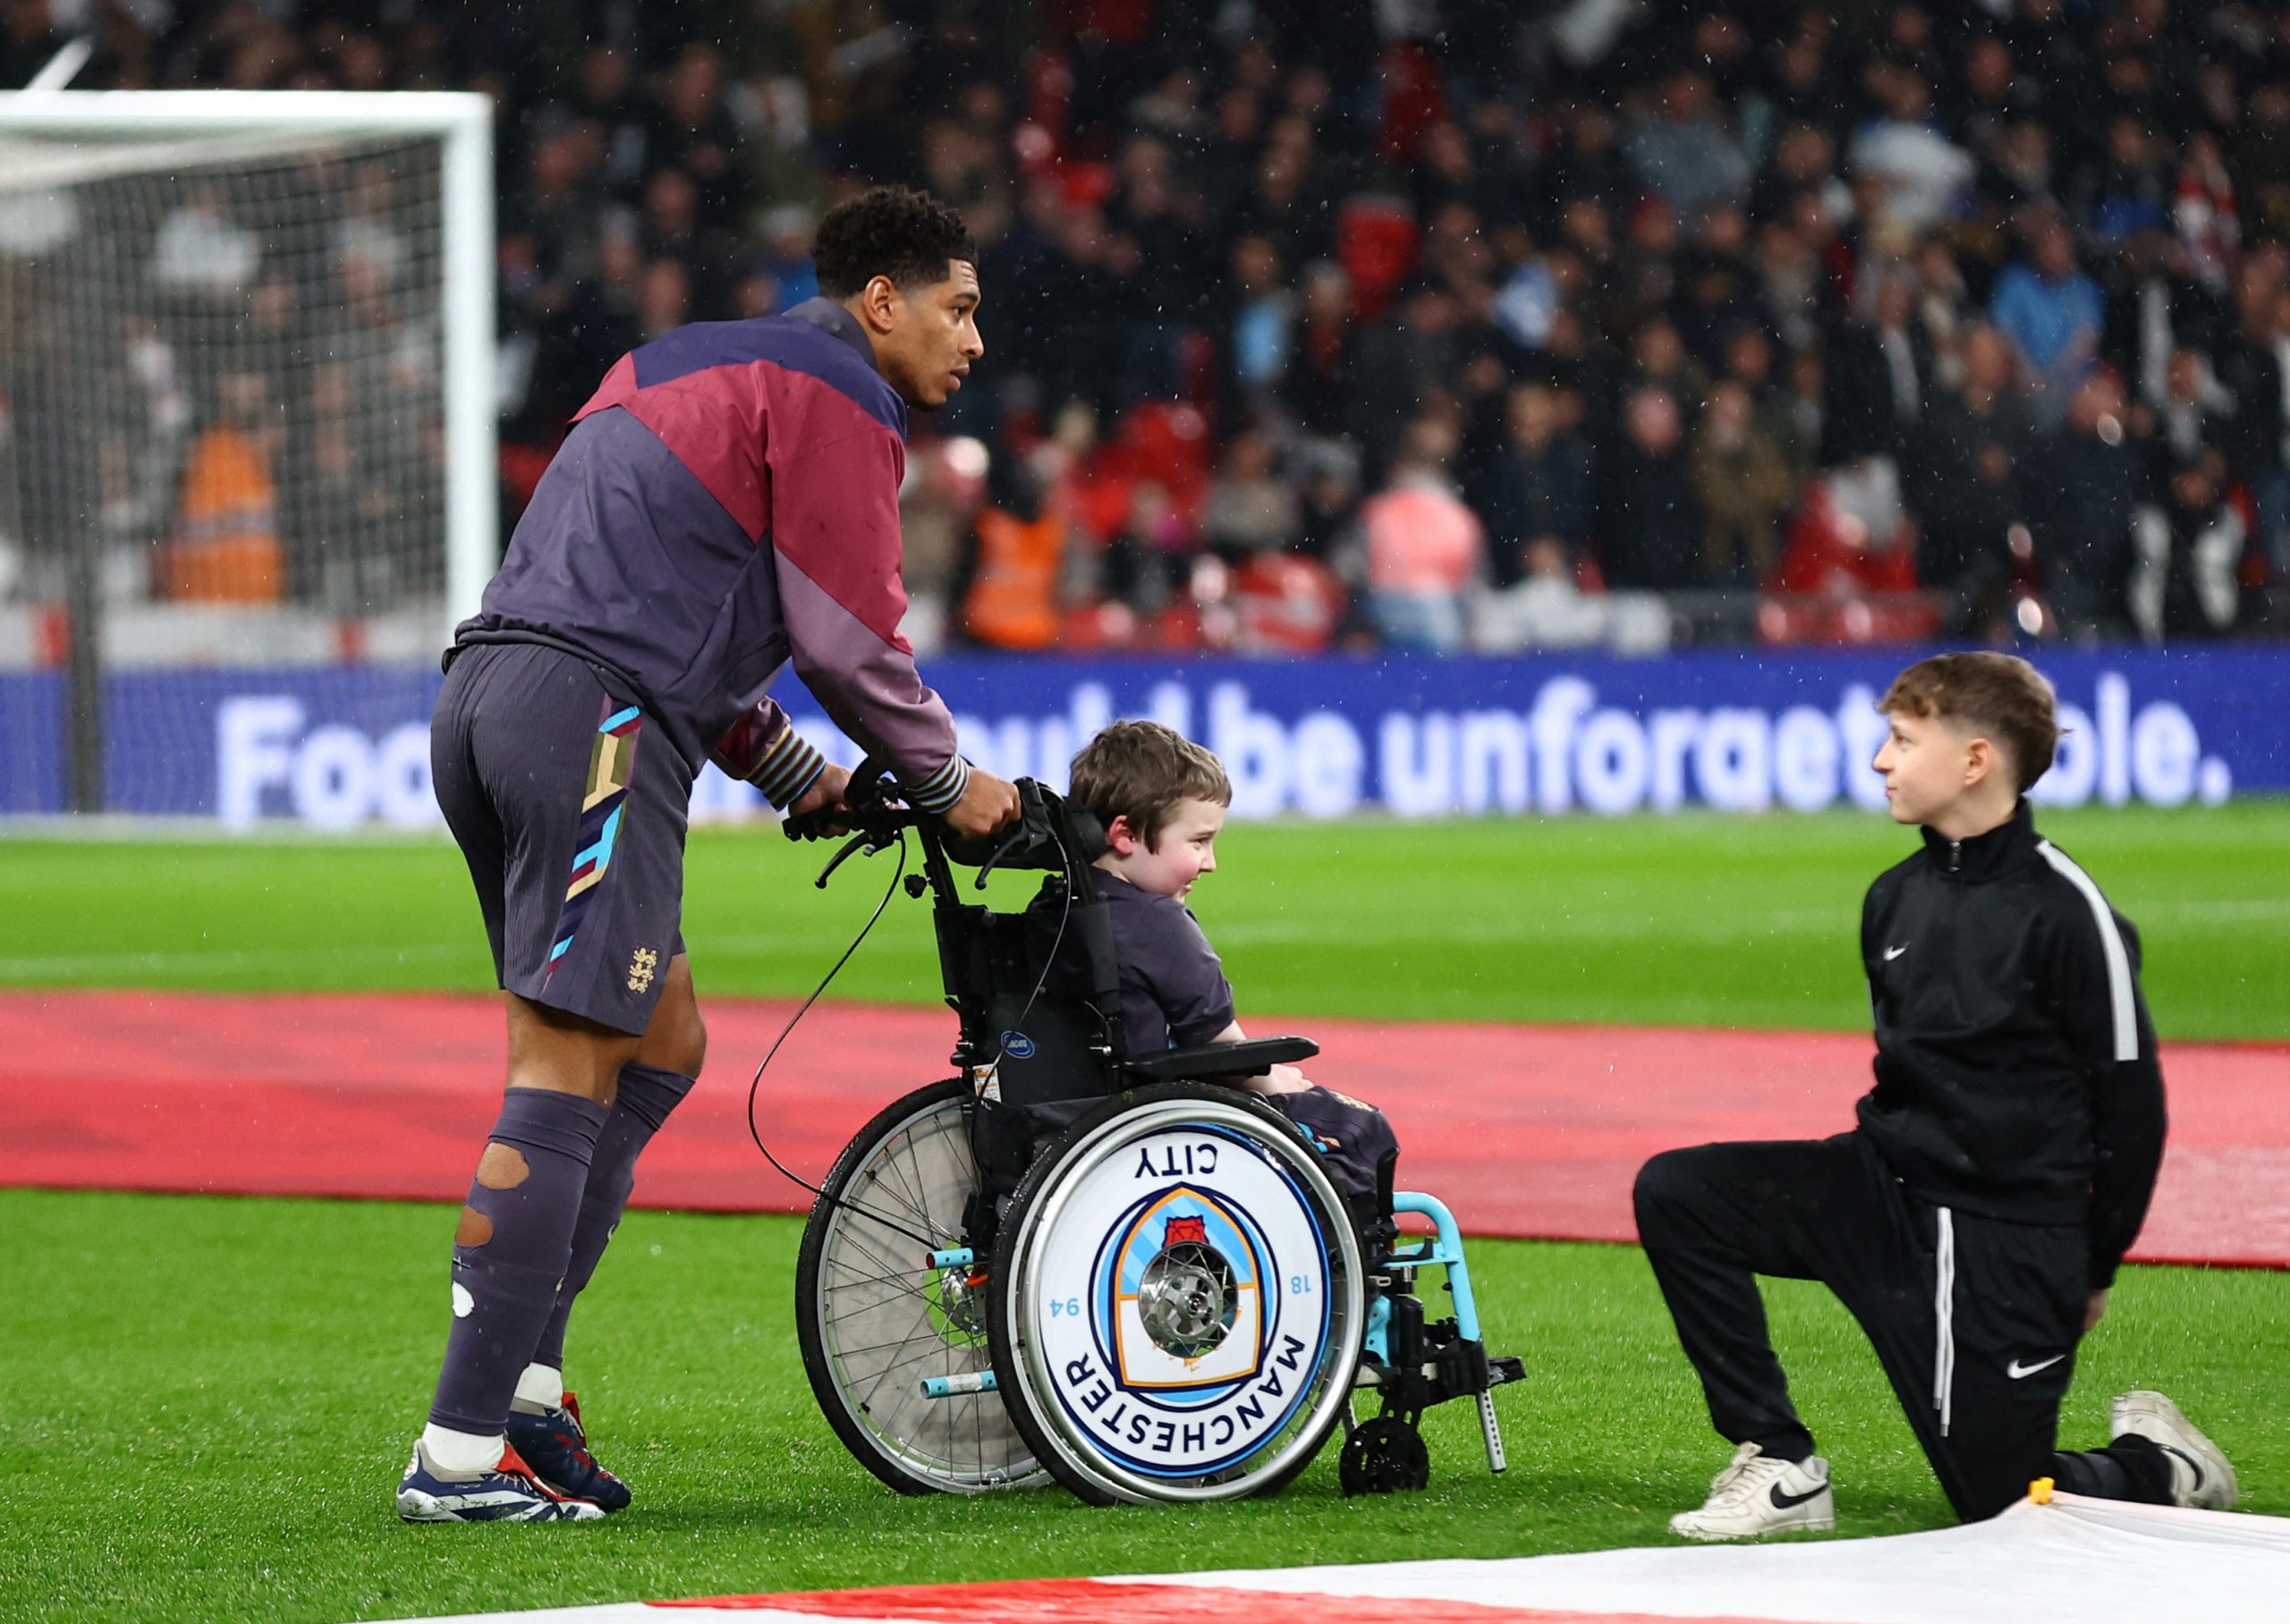 Touching moment as England star Bellingham gives his tracksuit top to mascot in wheelchair as it rains at Wembley